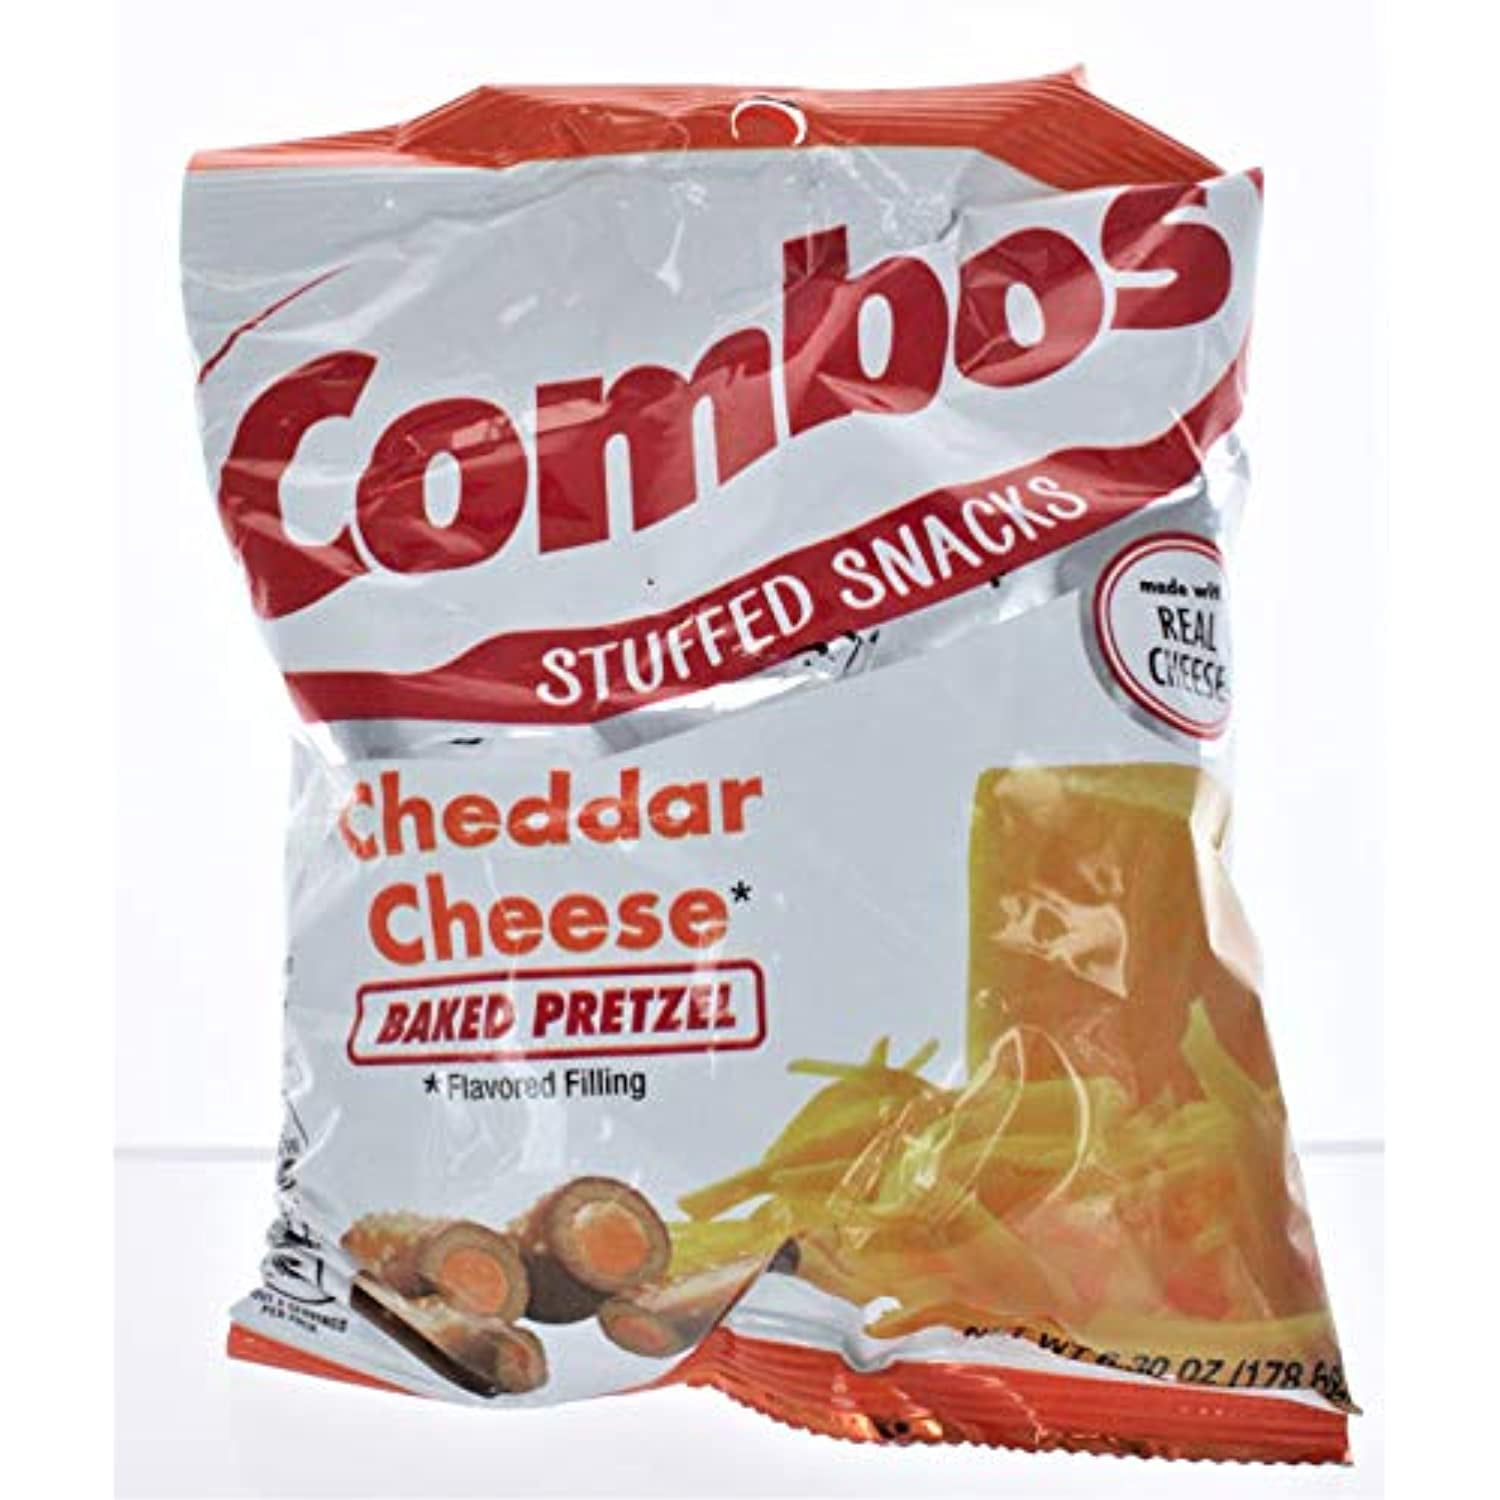 Combos Cheddar Cheese Pretzel Baked Snacks 6.3-Ounce Bag (Pack Of 6)